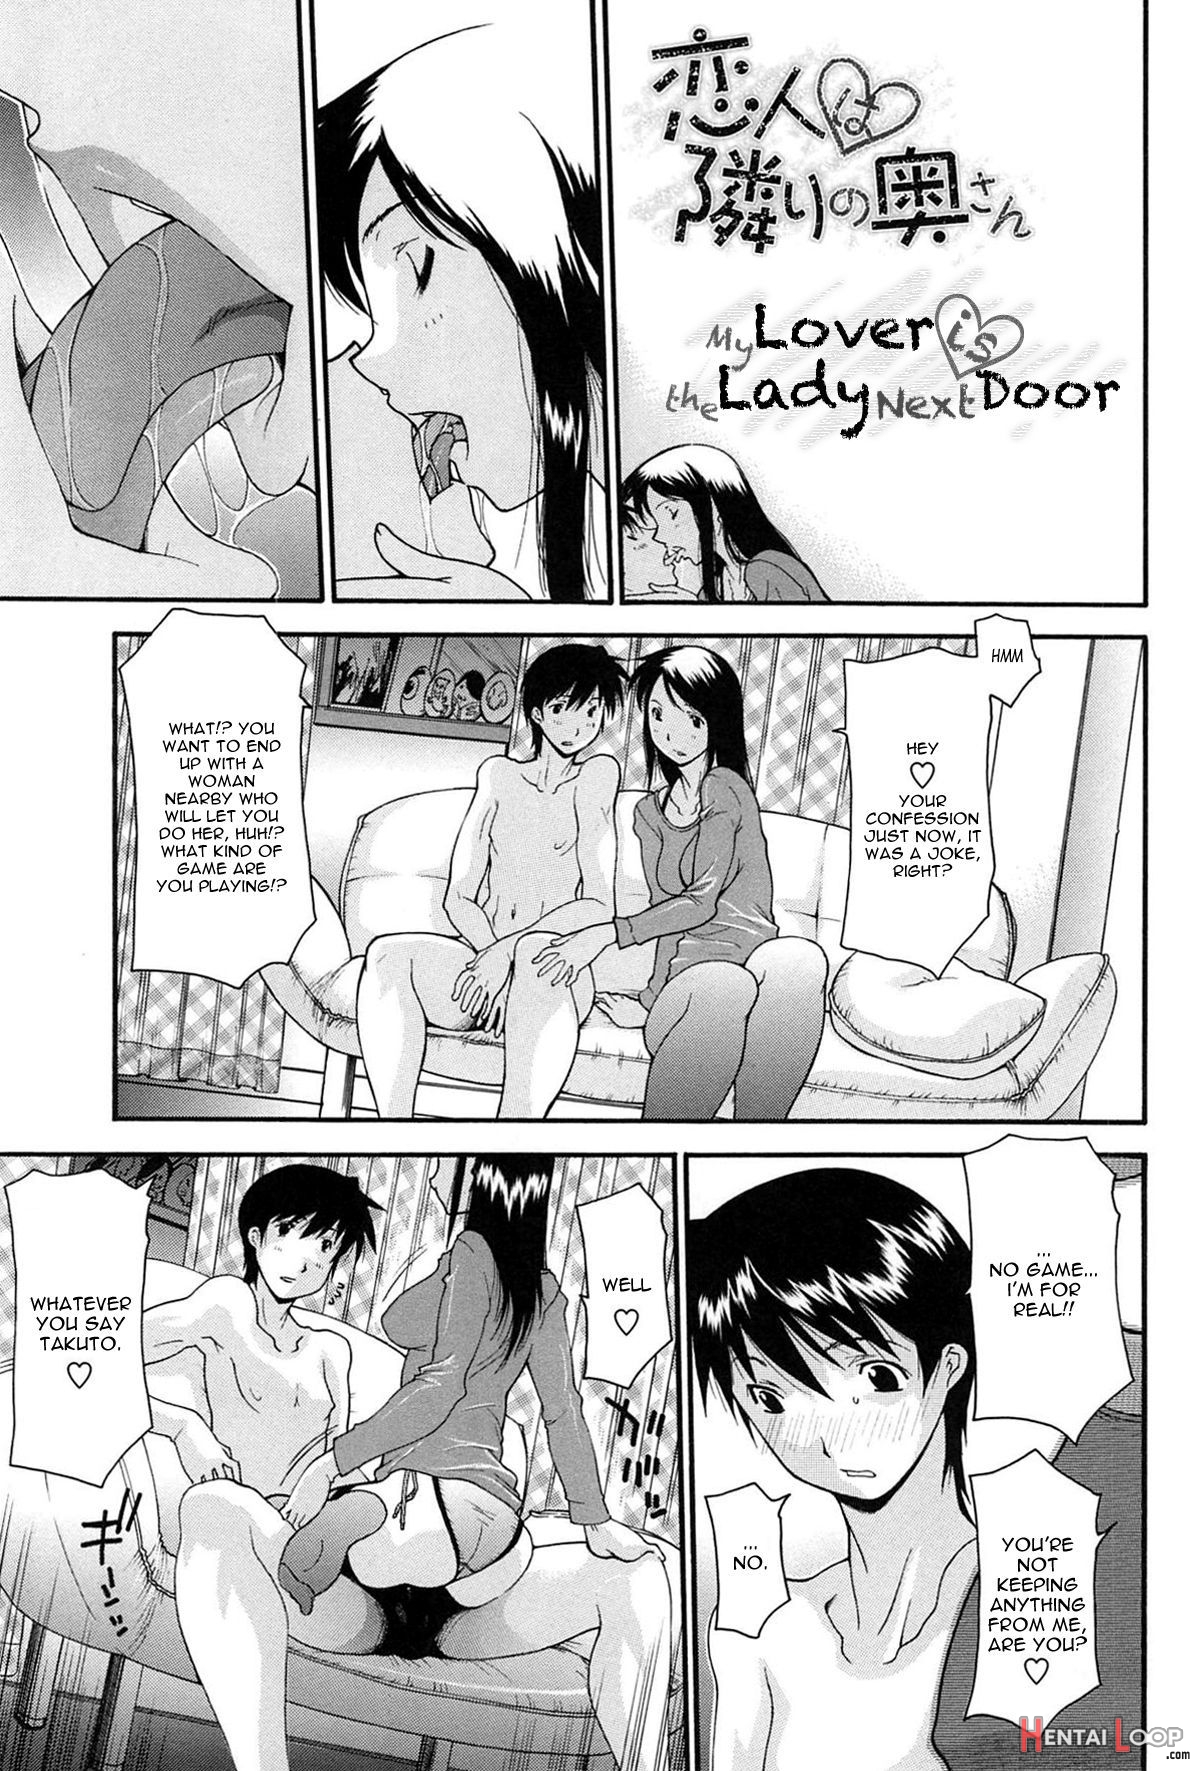 My Lover Is The Lady Next Door page 1